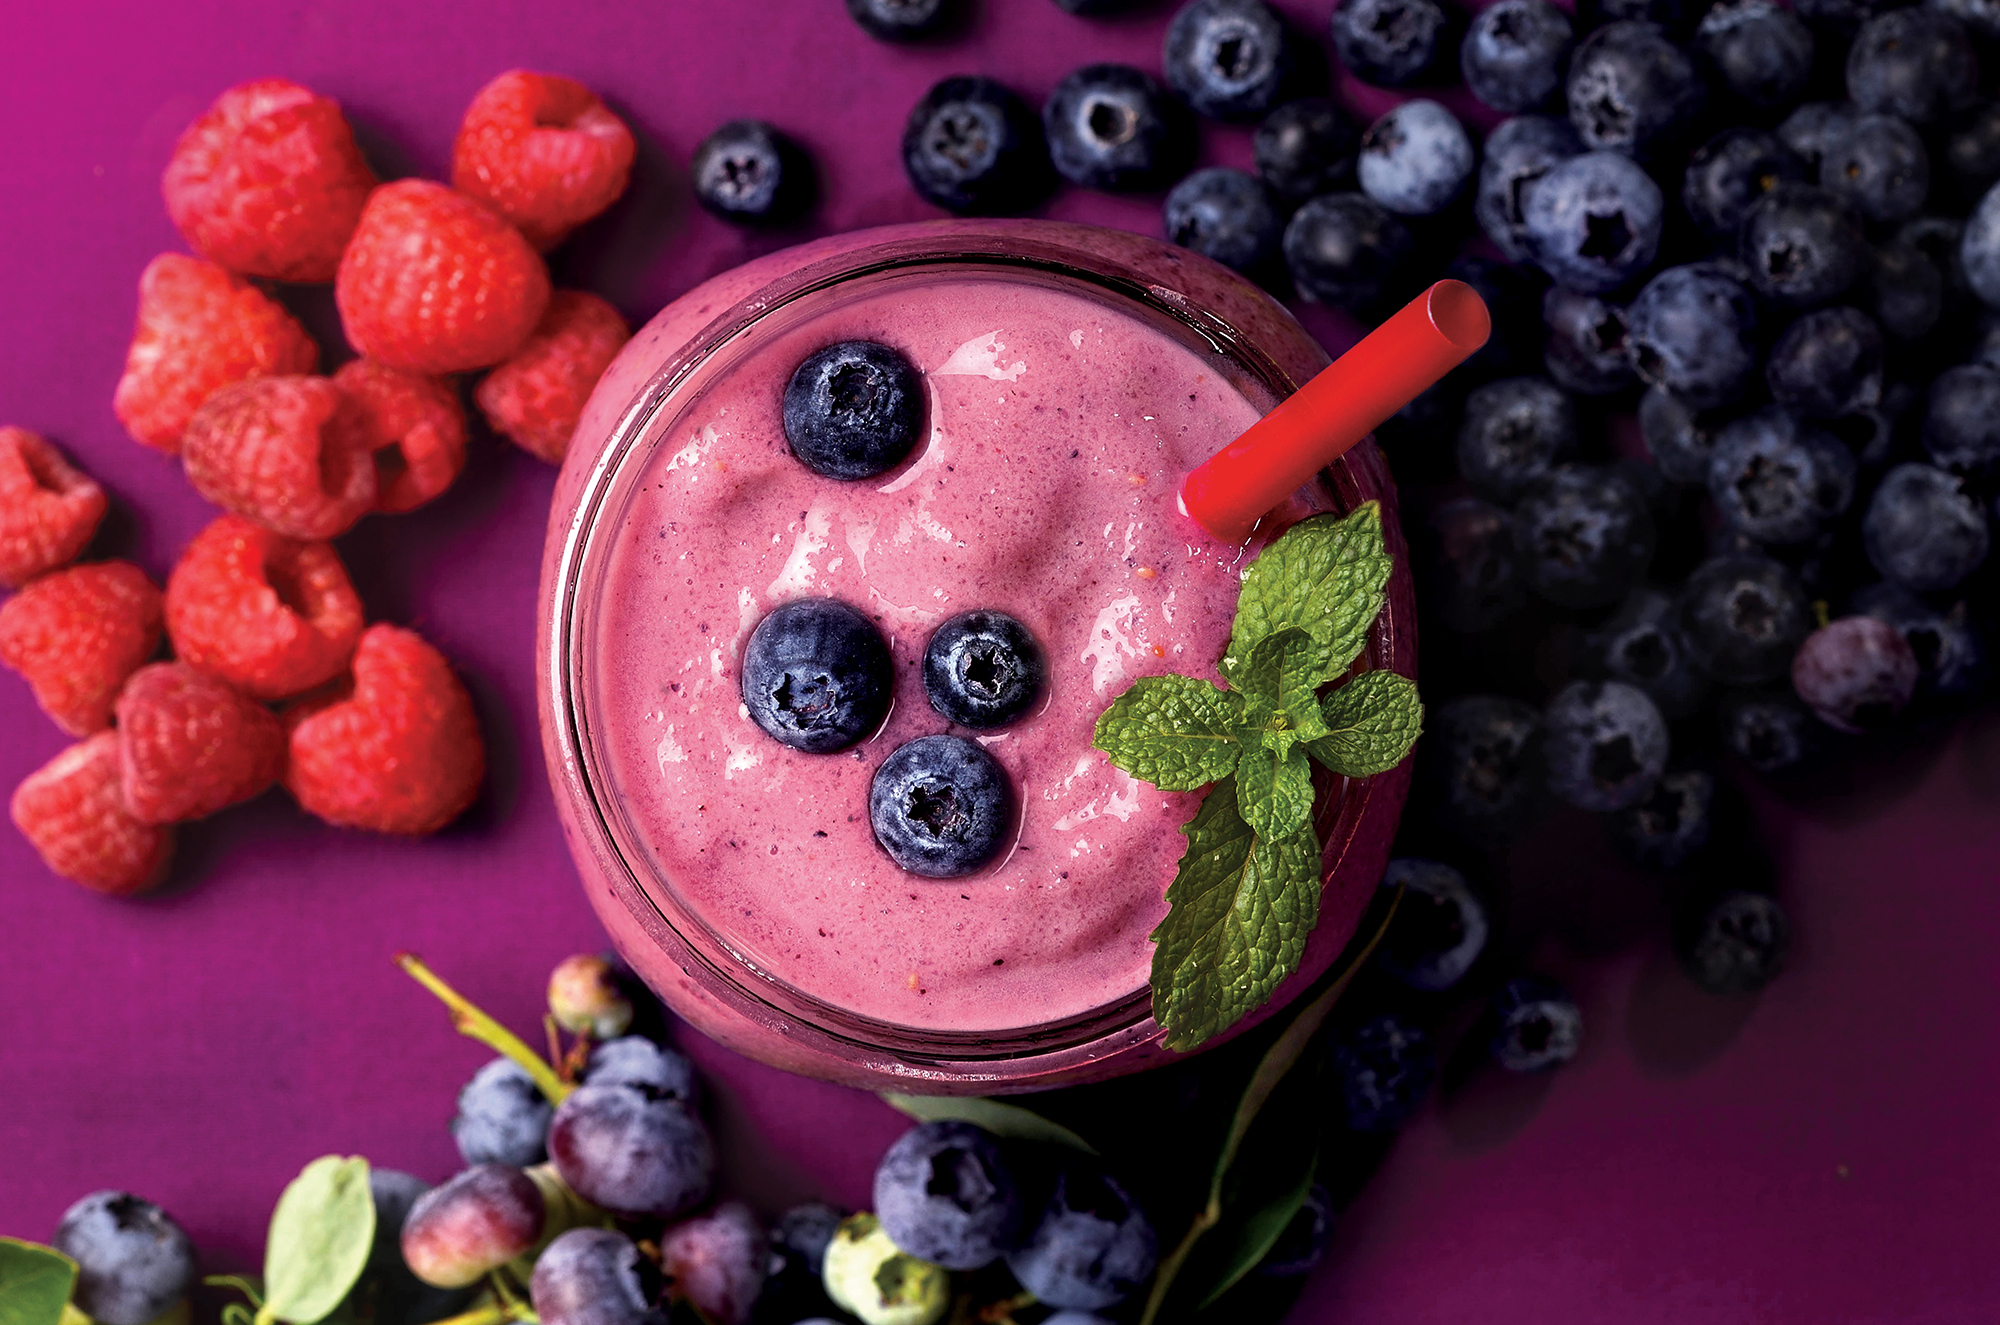 Birds-eye-photo of Nature's Table Rain Forest Rhumba smoothie, surrounded by raspberries and blueberries.